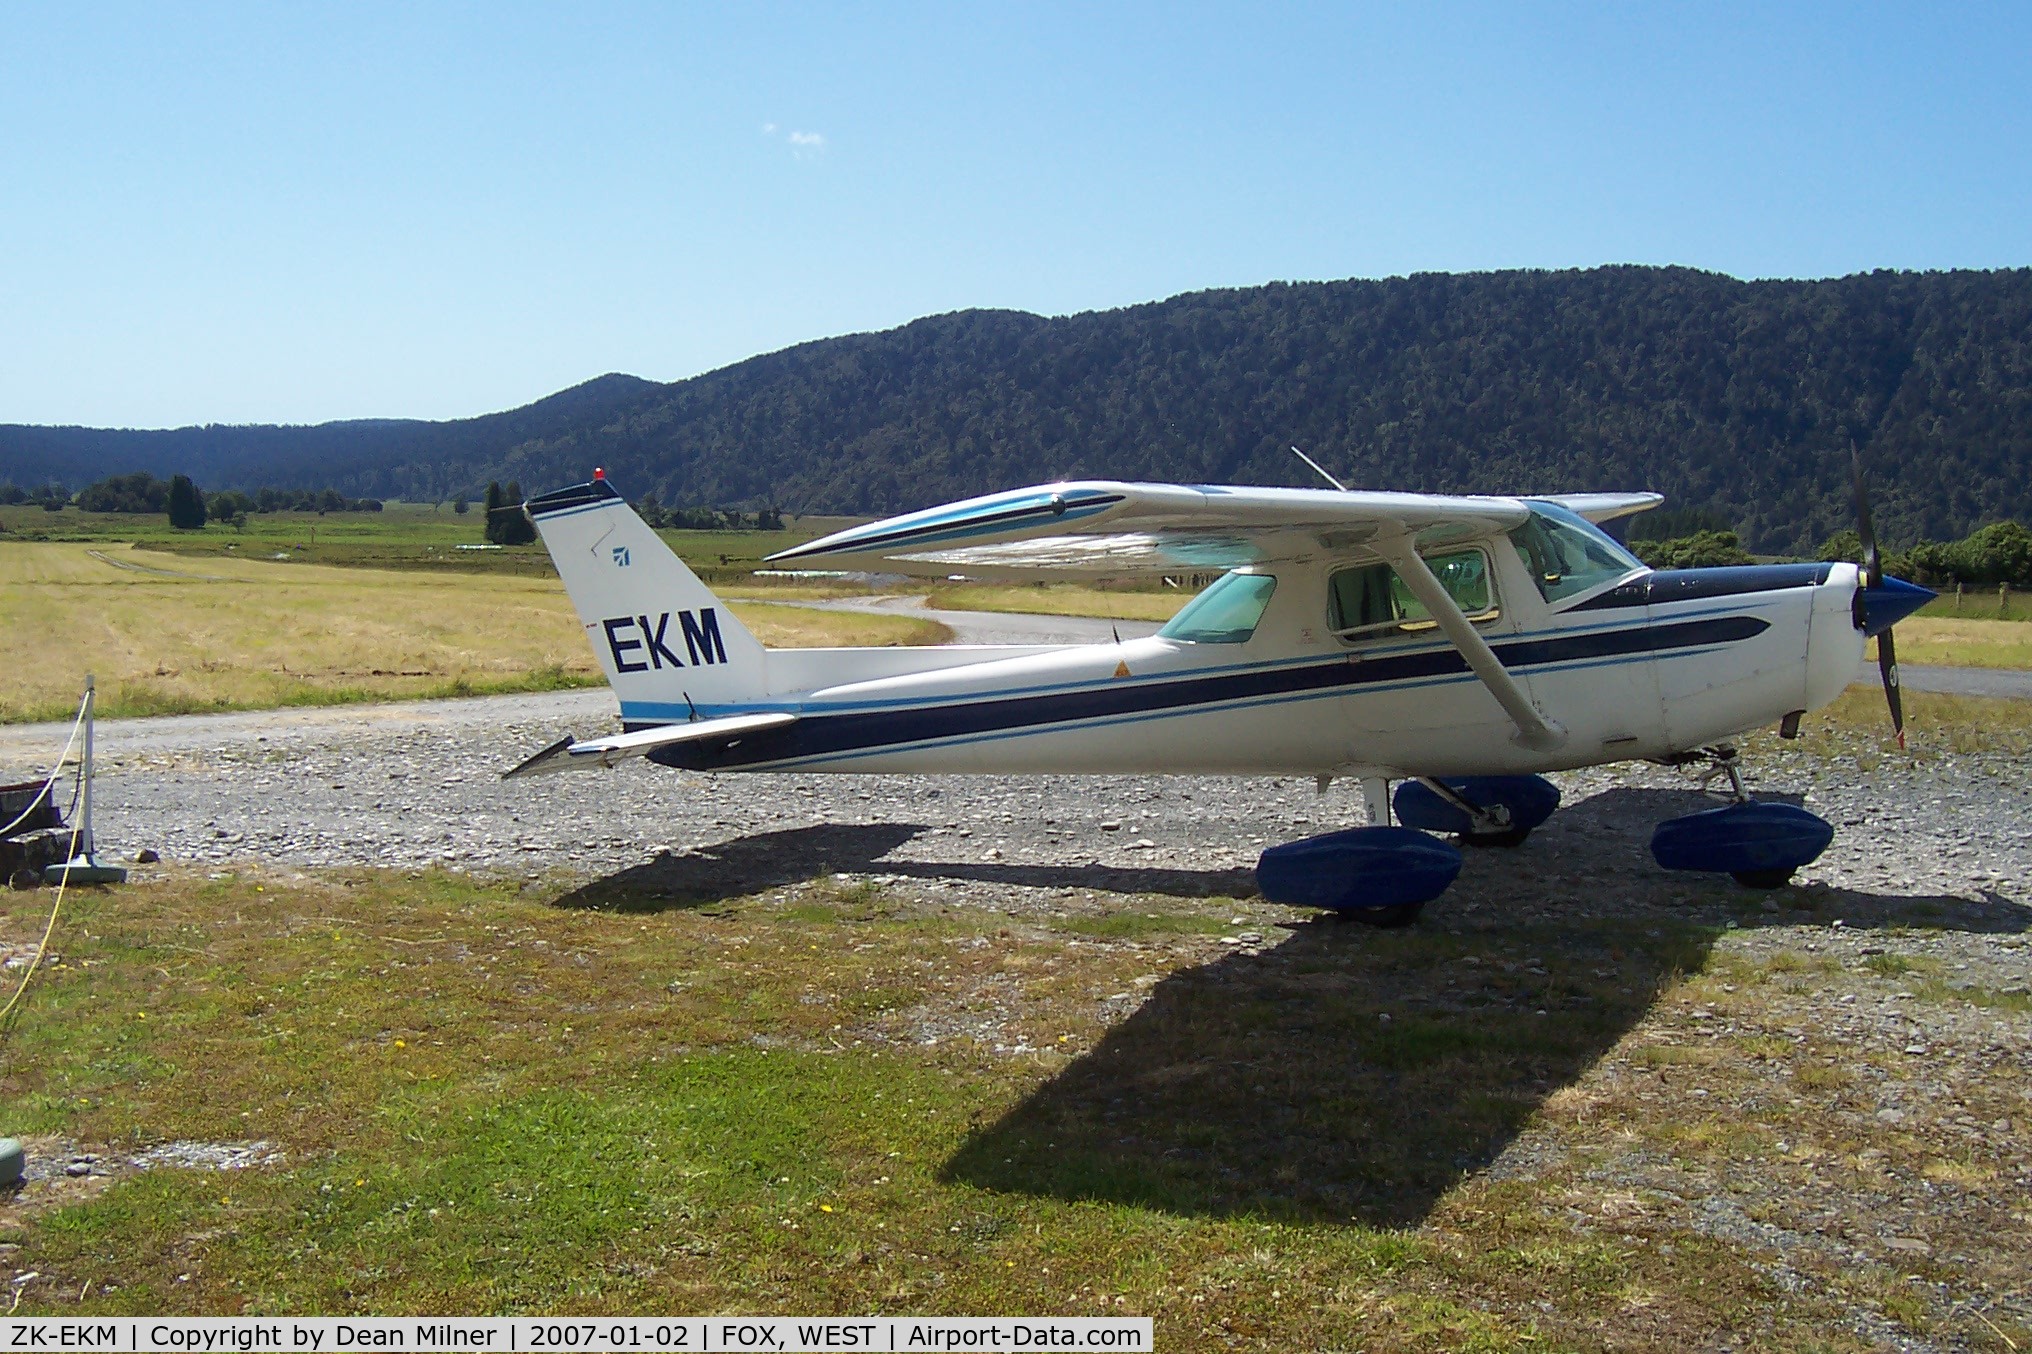 ZK-EKM, Cessna 152 C/N 15280954, on the way back to Motueka, stop over at Fox for lunch